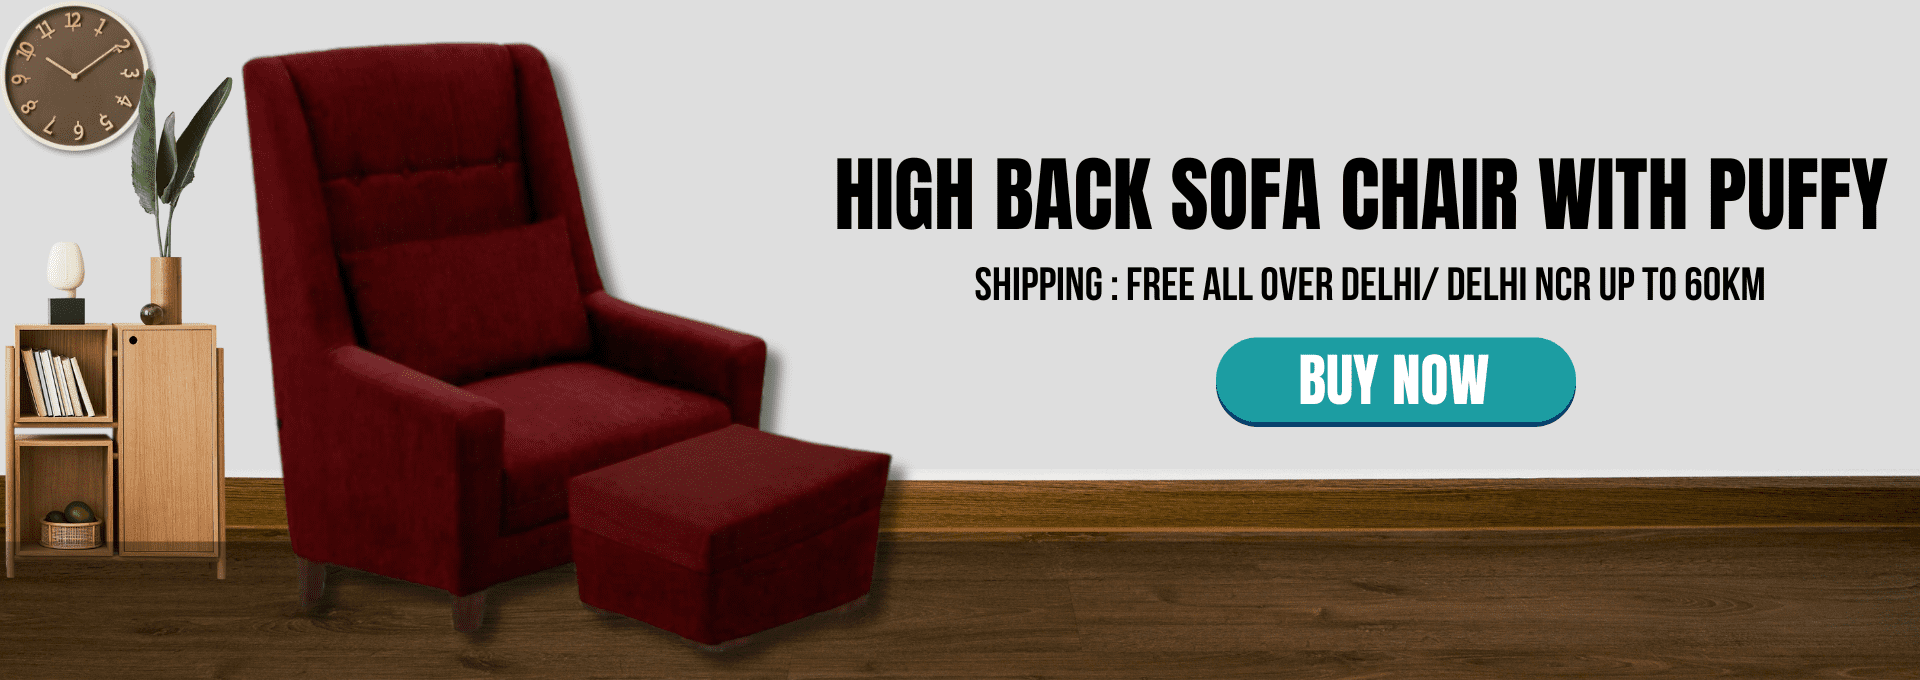 High Back Sofa Chair with Puffy